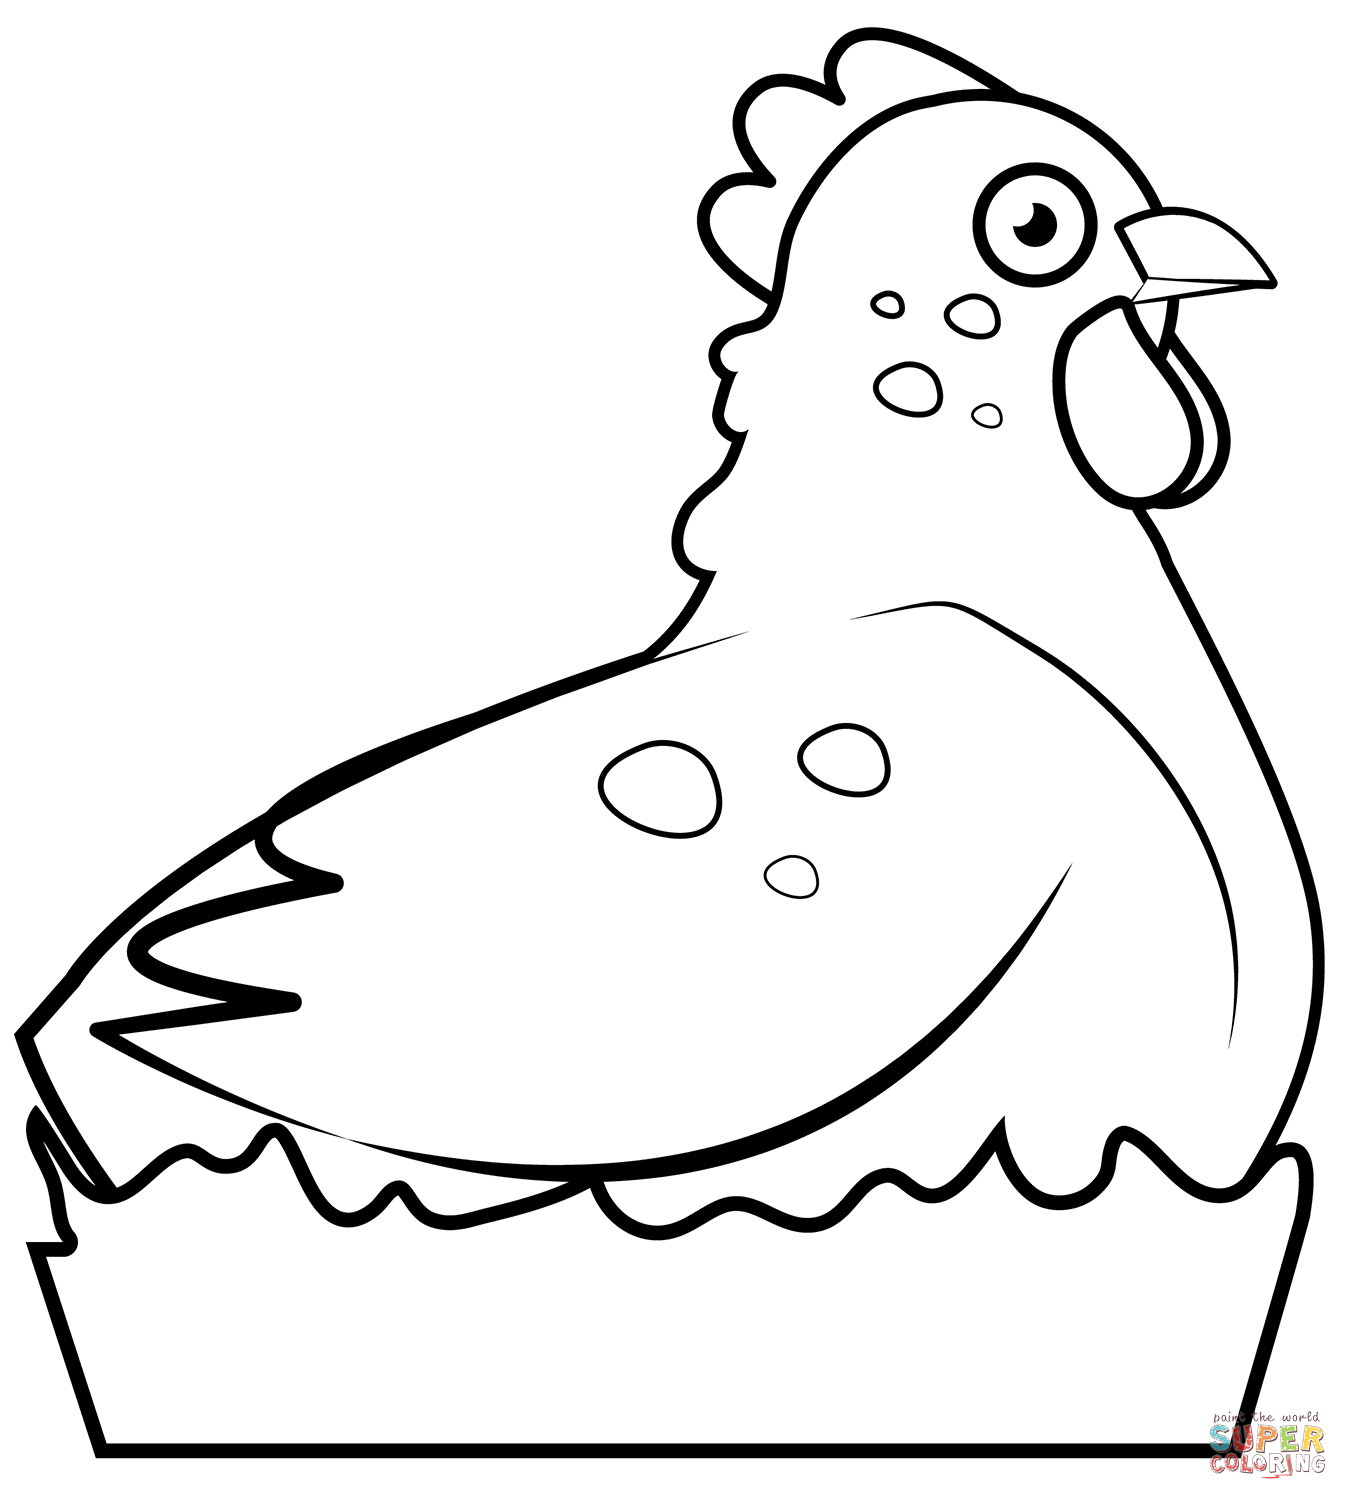 Hen sitting in nest coloring page free printable coloring pages